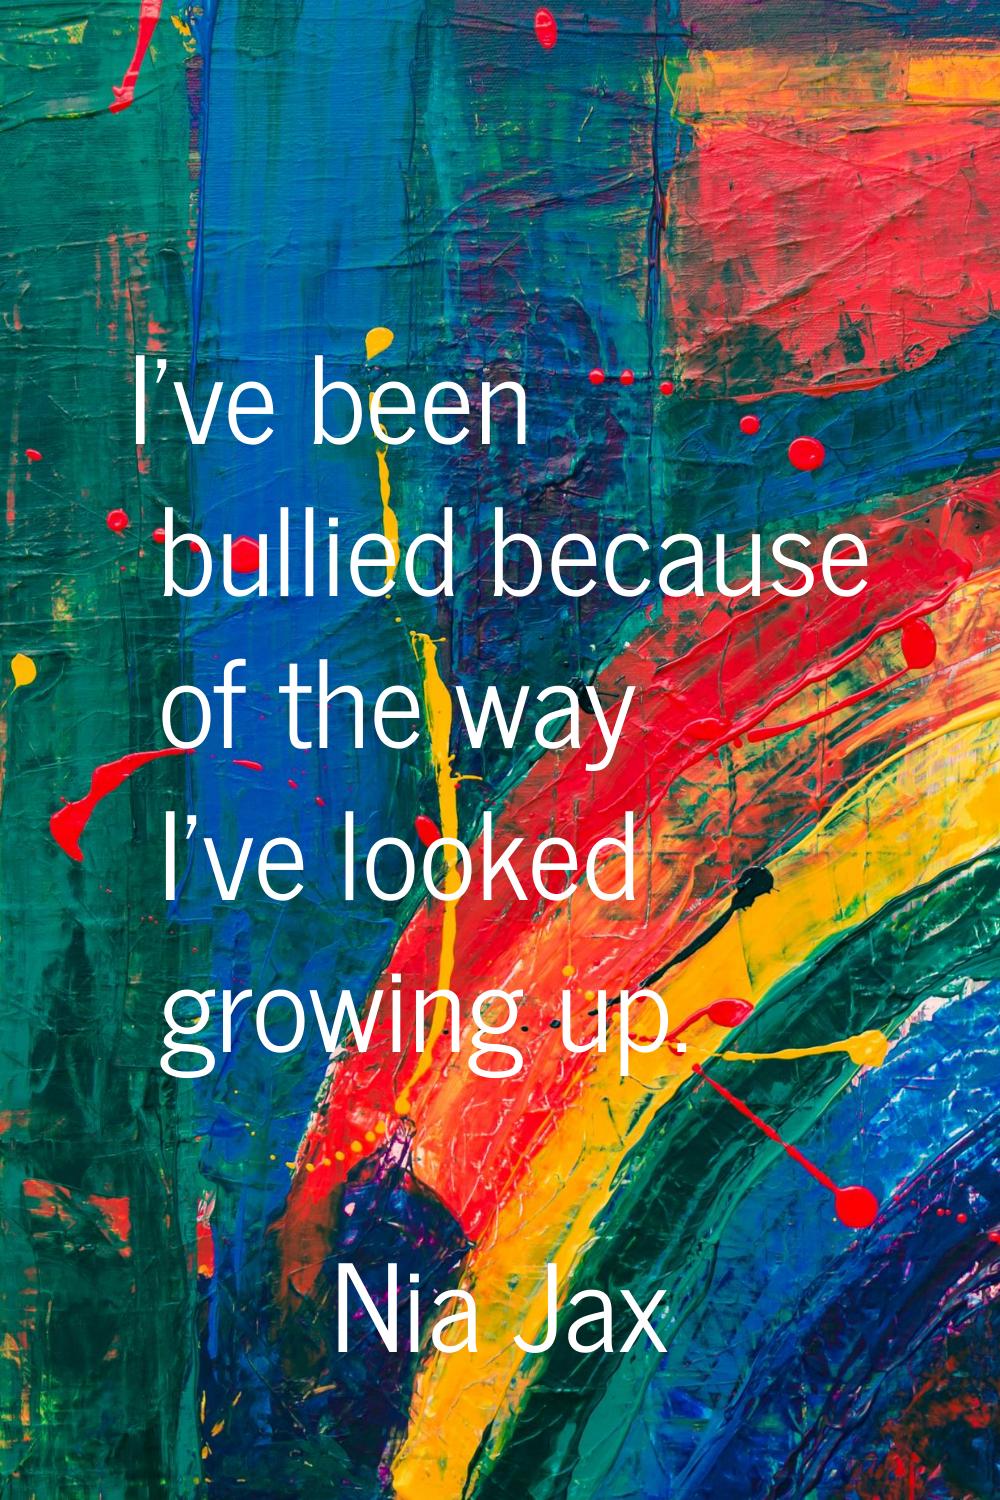 I've been bullied because of the way I've looked growing up.